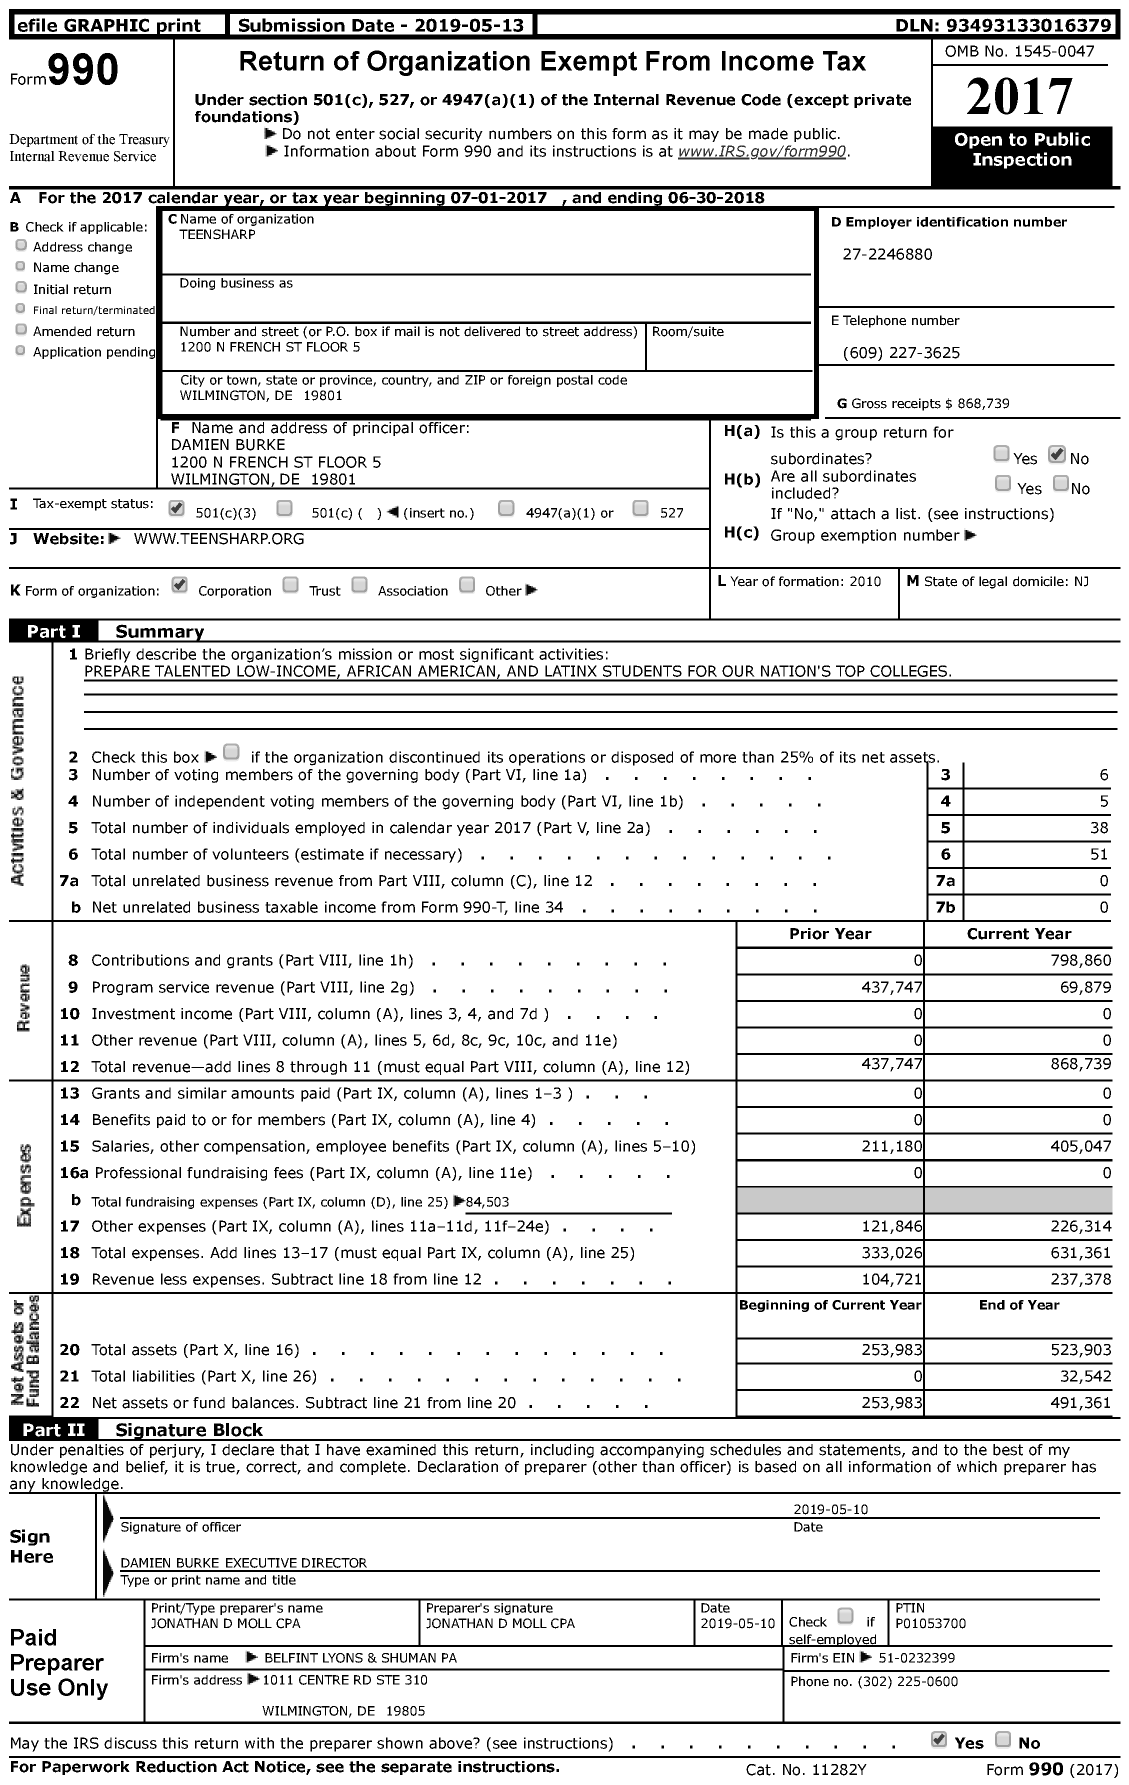 Image of first page of 2017 Form 990 for TeenSHARP